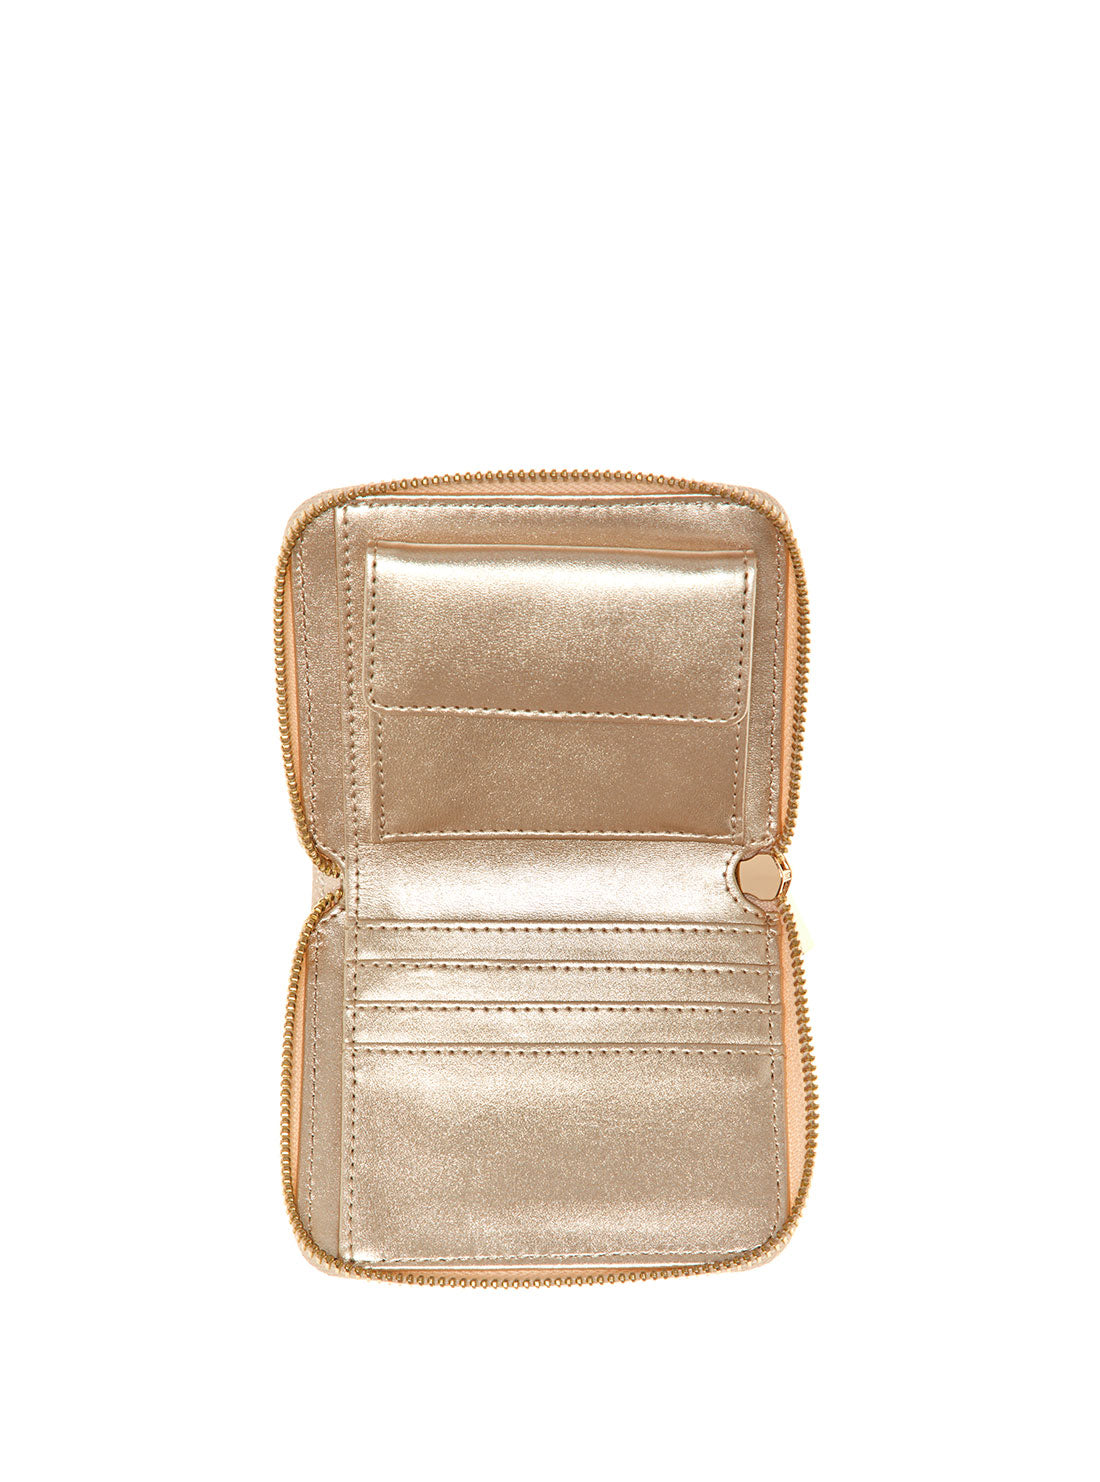 Buyr.com | Wallets | GUESS Noelle Small Zip Around Wallet, Apricot